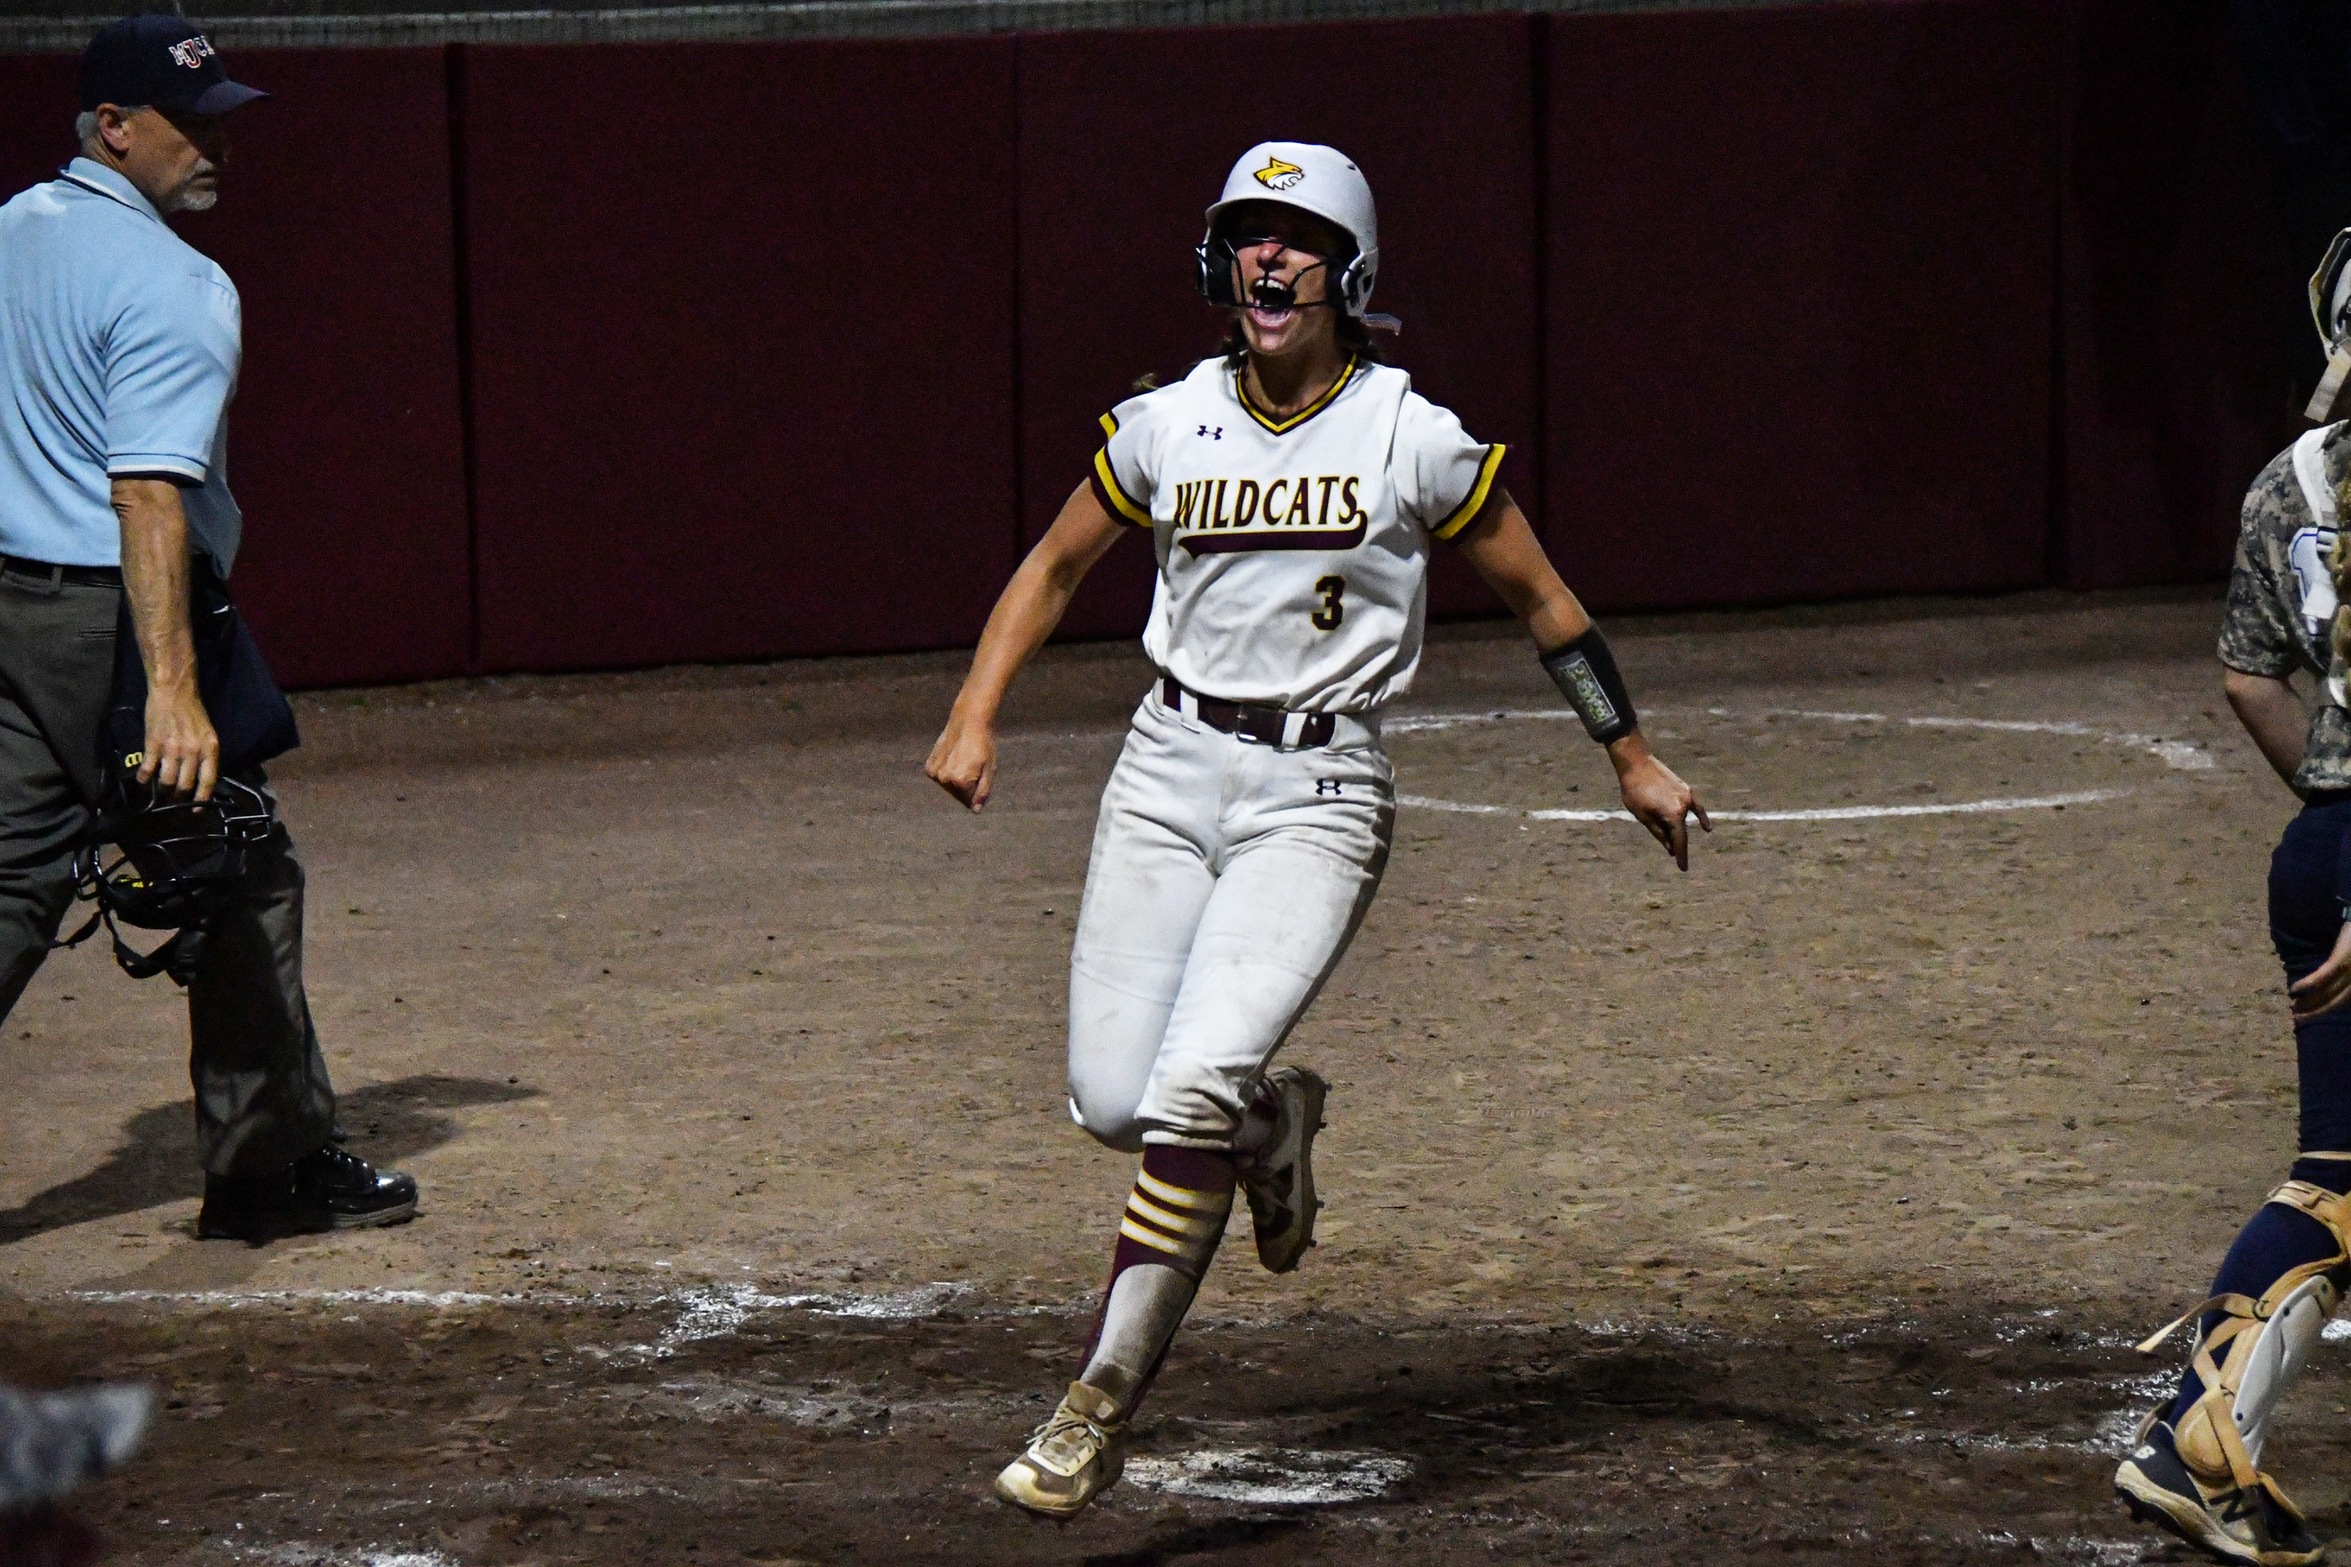 No. 8 Pearl River's great pitching leads to sweep of No. 17 Gulf Coast